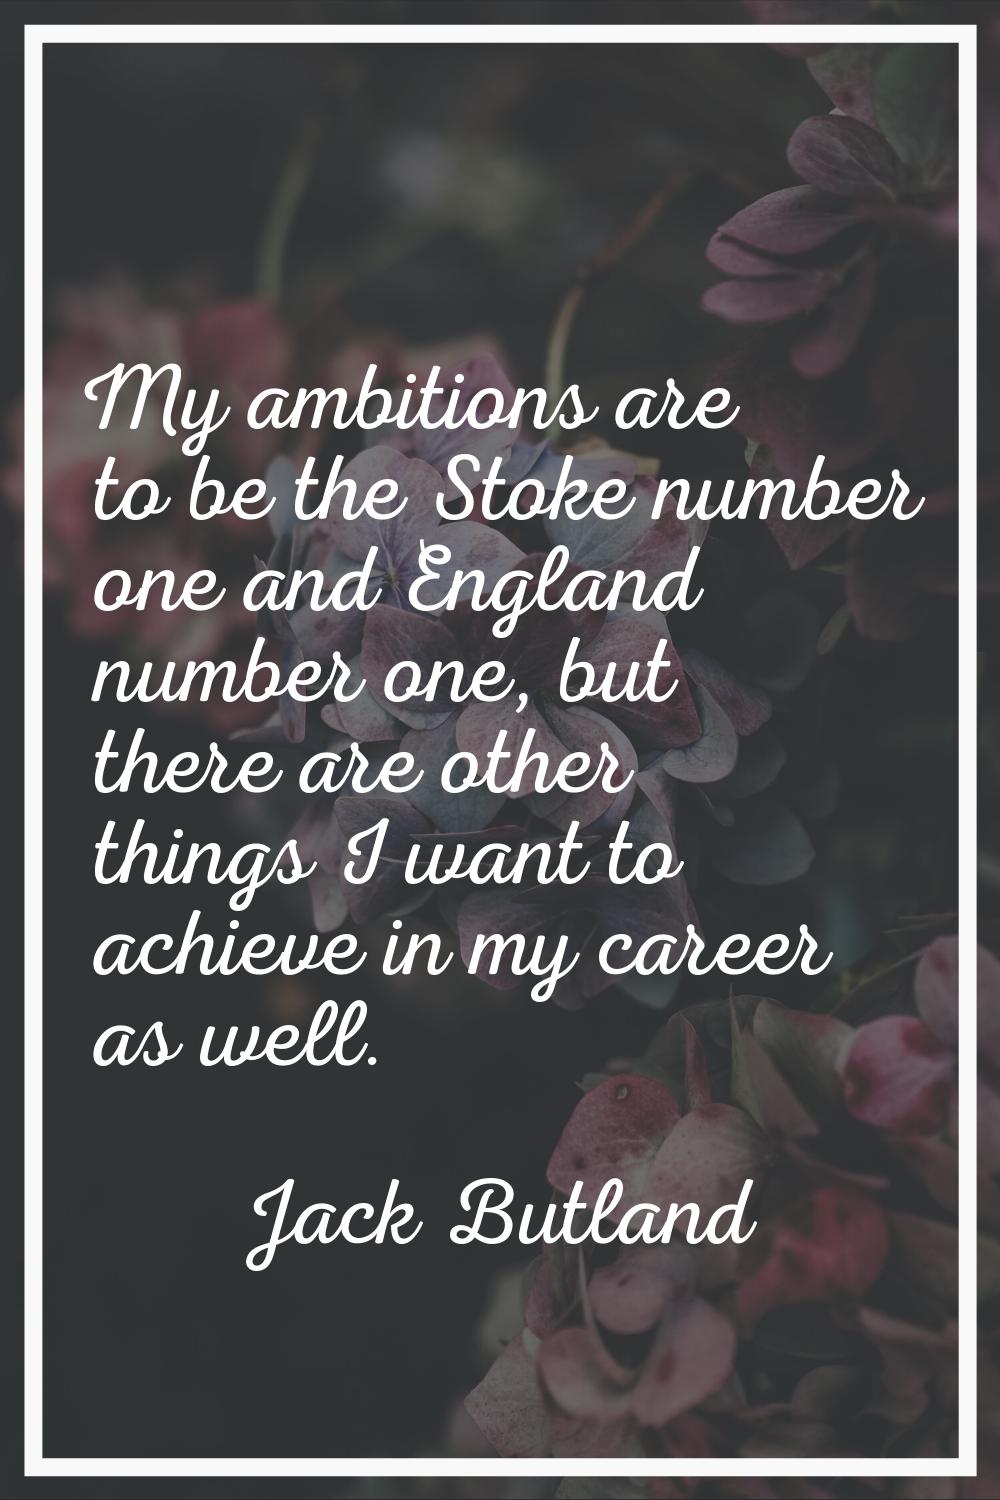 My ambitions are to be the Stoke number one and England number one, but there are other things I wa